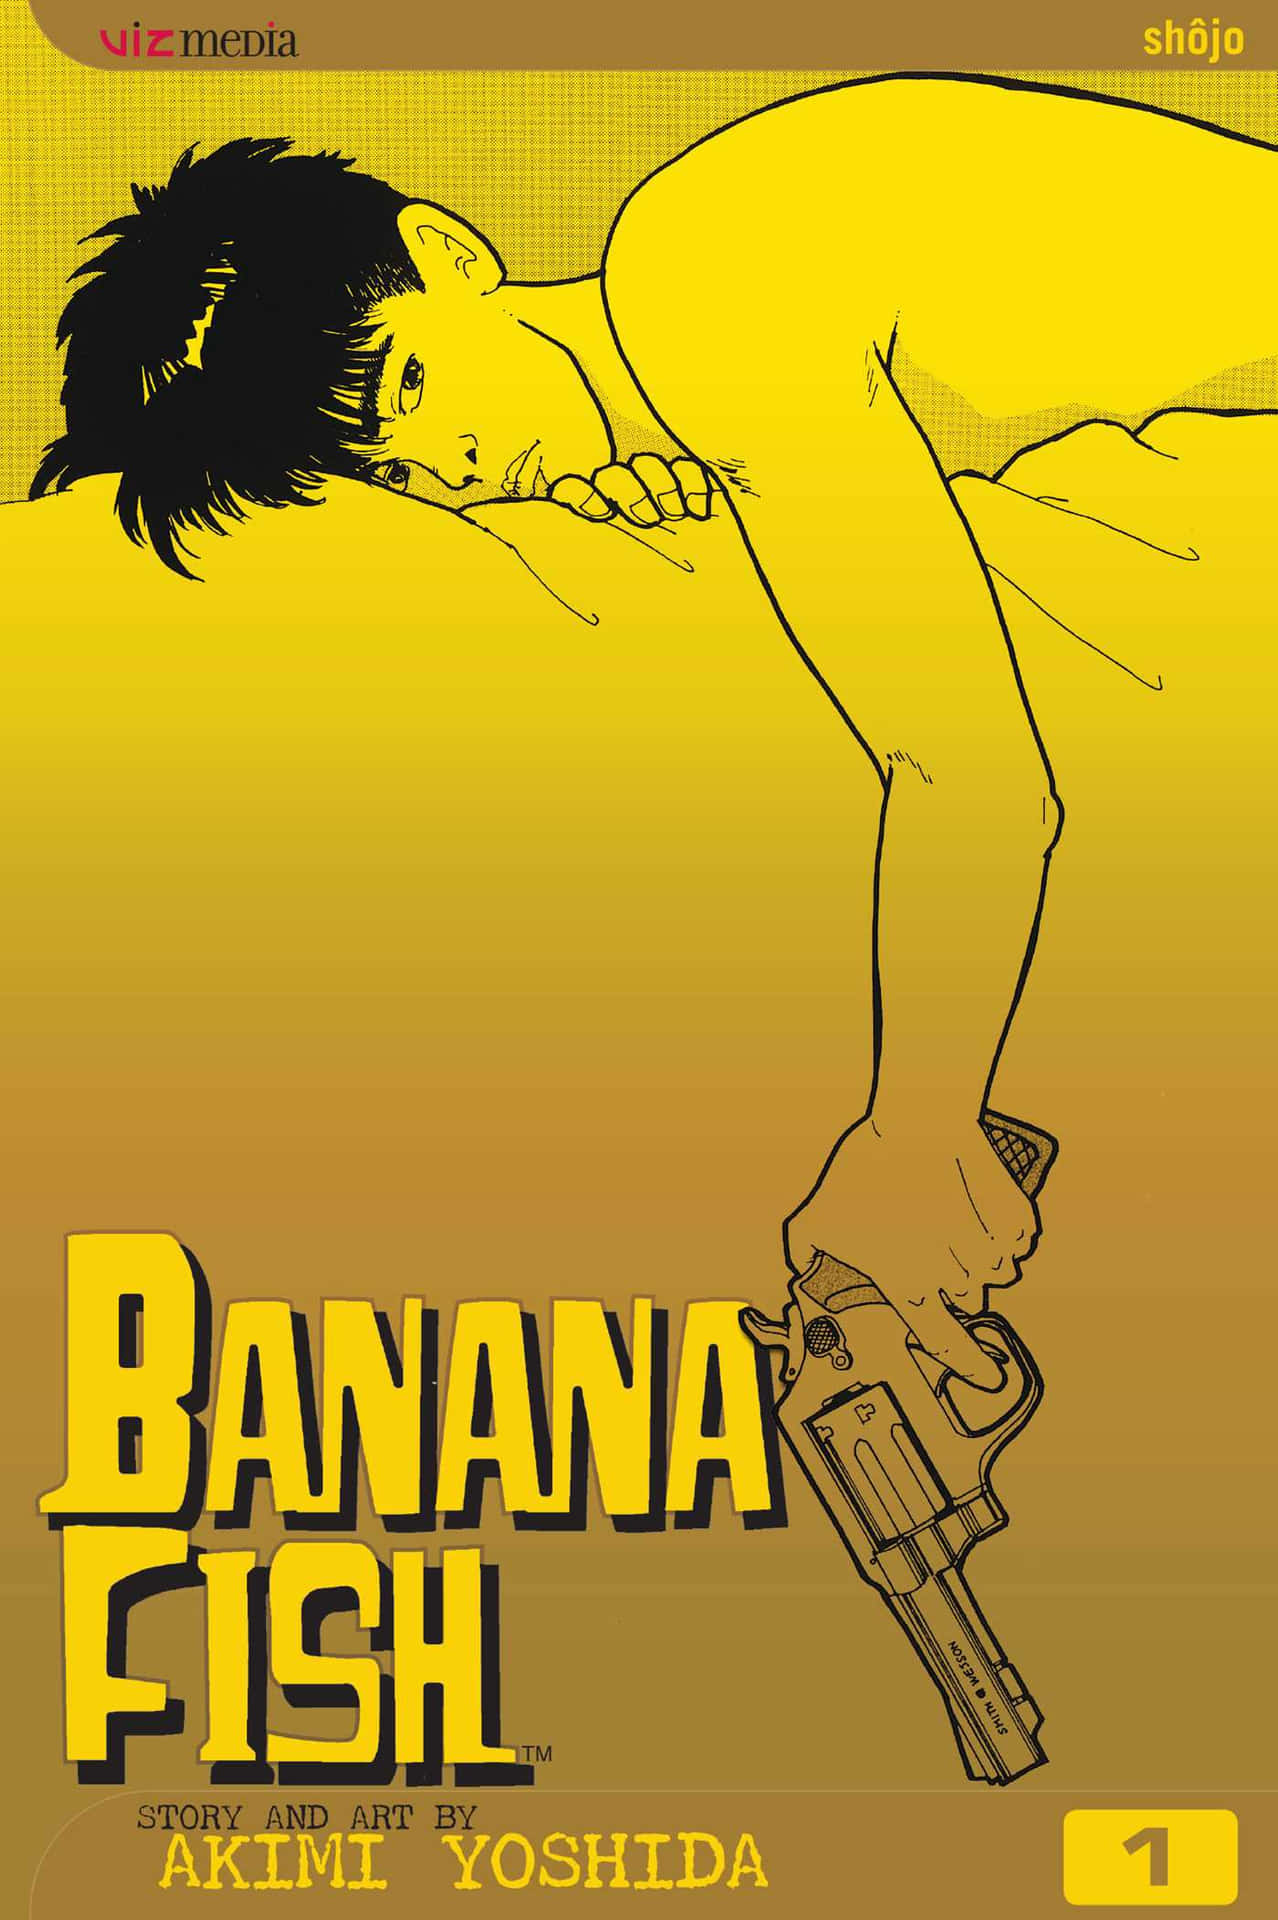 "Banana Fish: A Story of Friendship and Adventure"